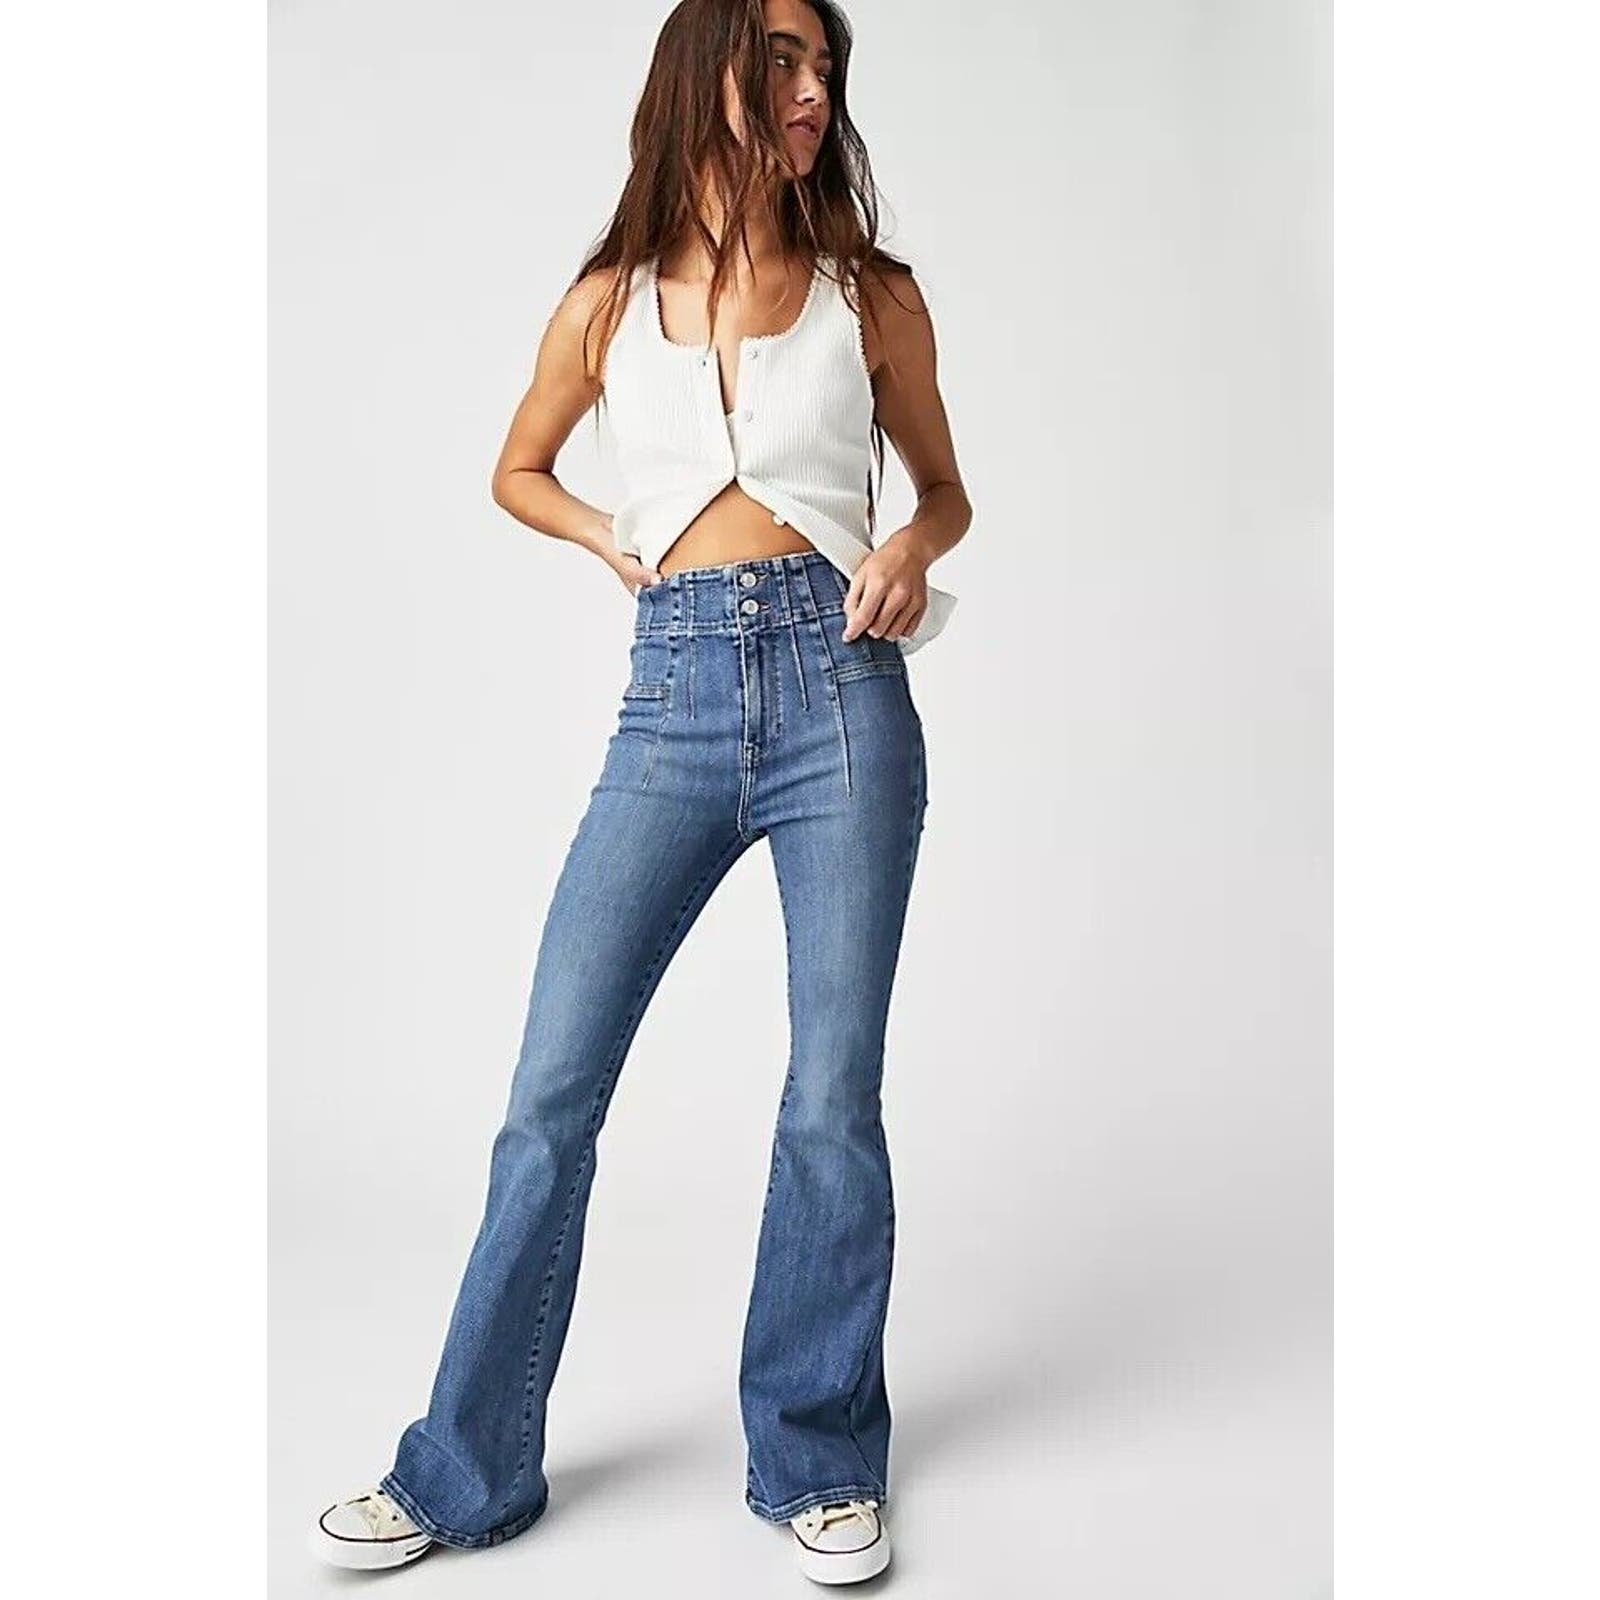 Authentic Free People We the Free Jayde Flare Jeans Hig